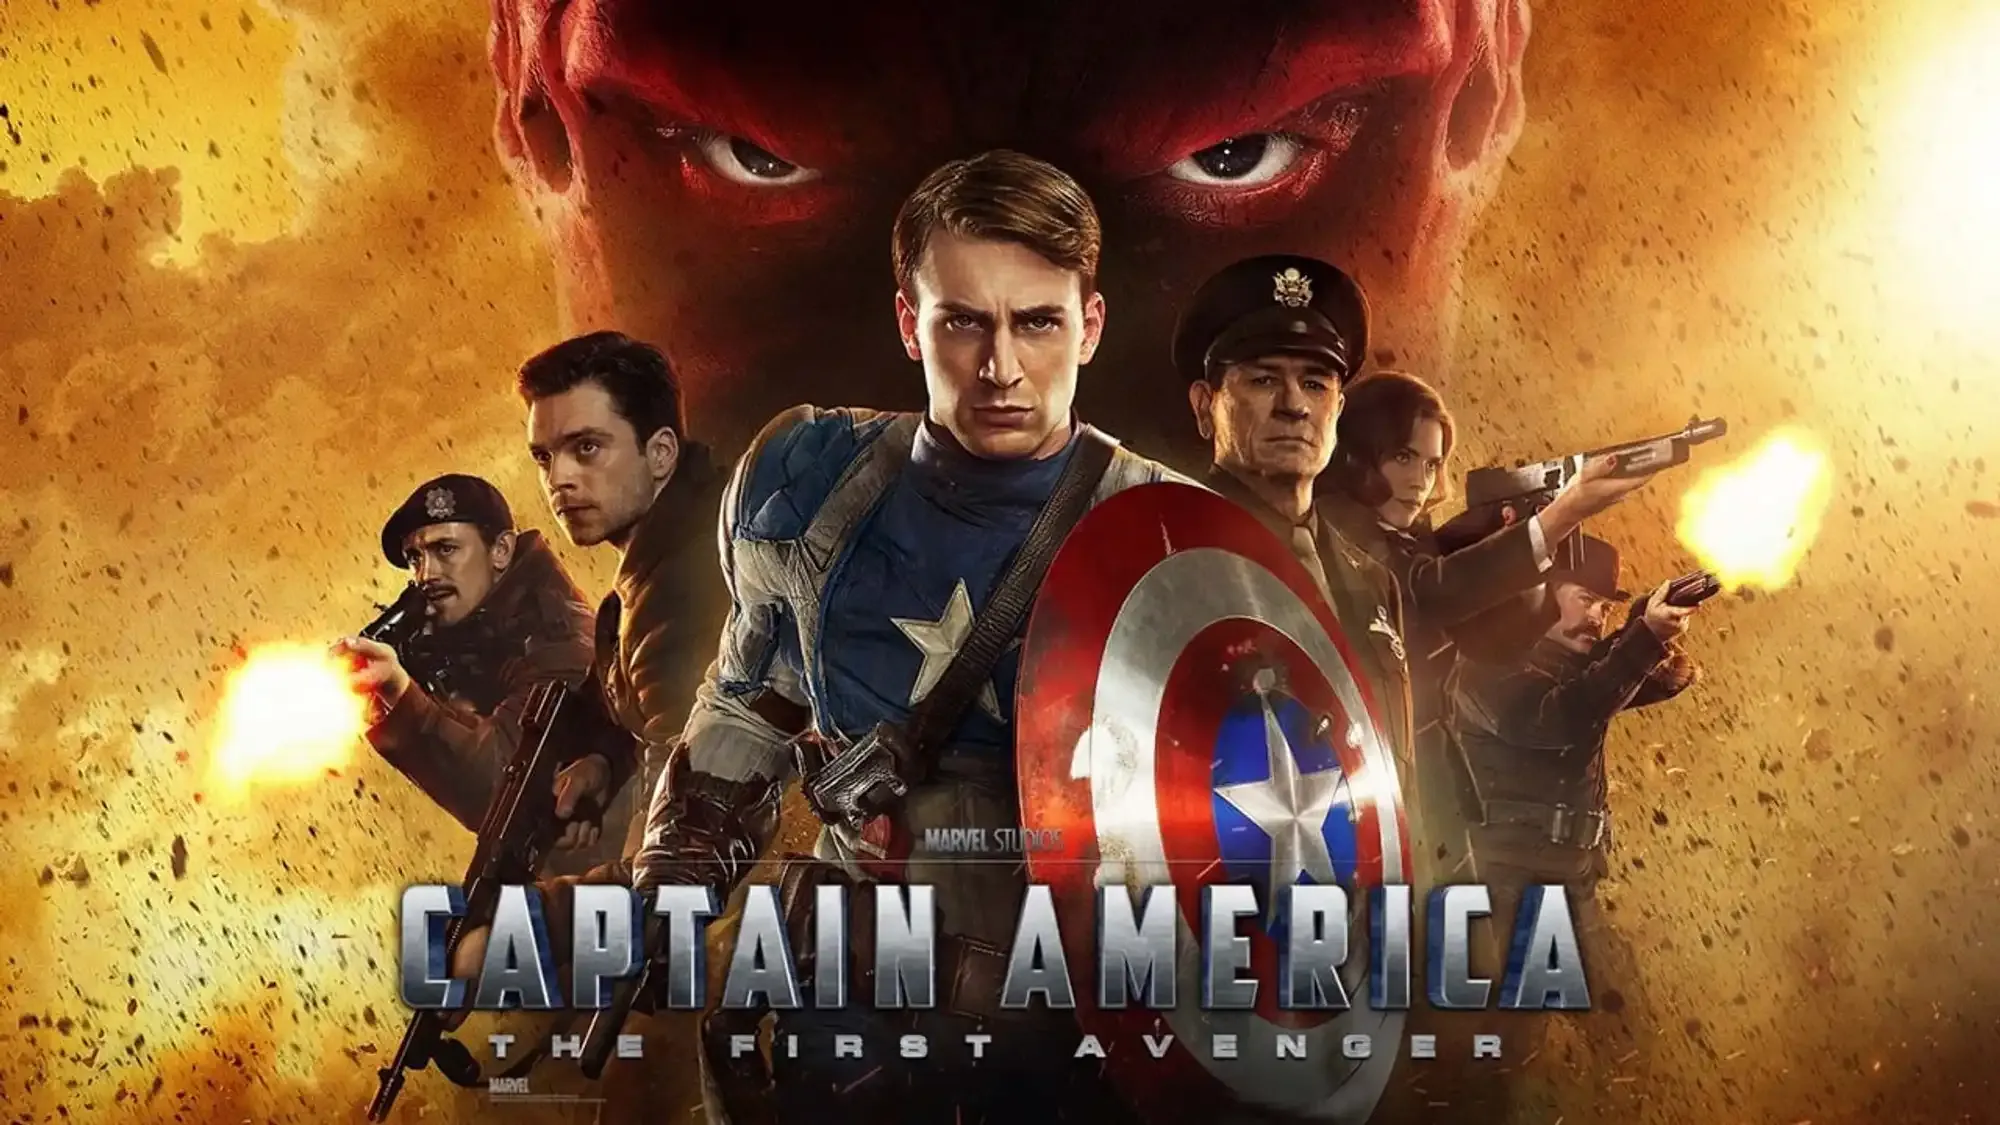 Captain America: The First Avenger movie review